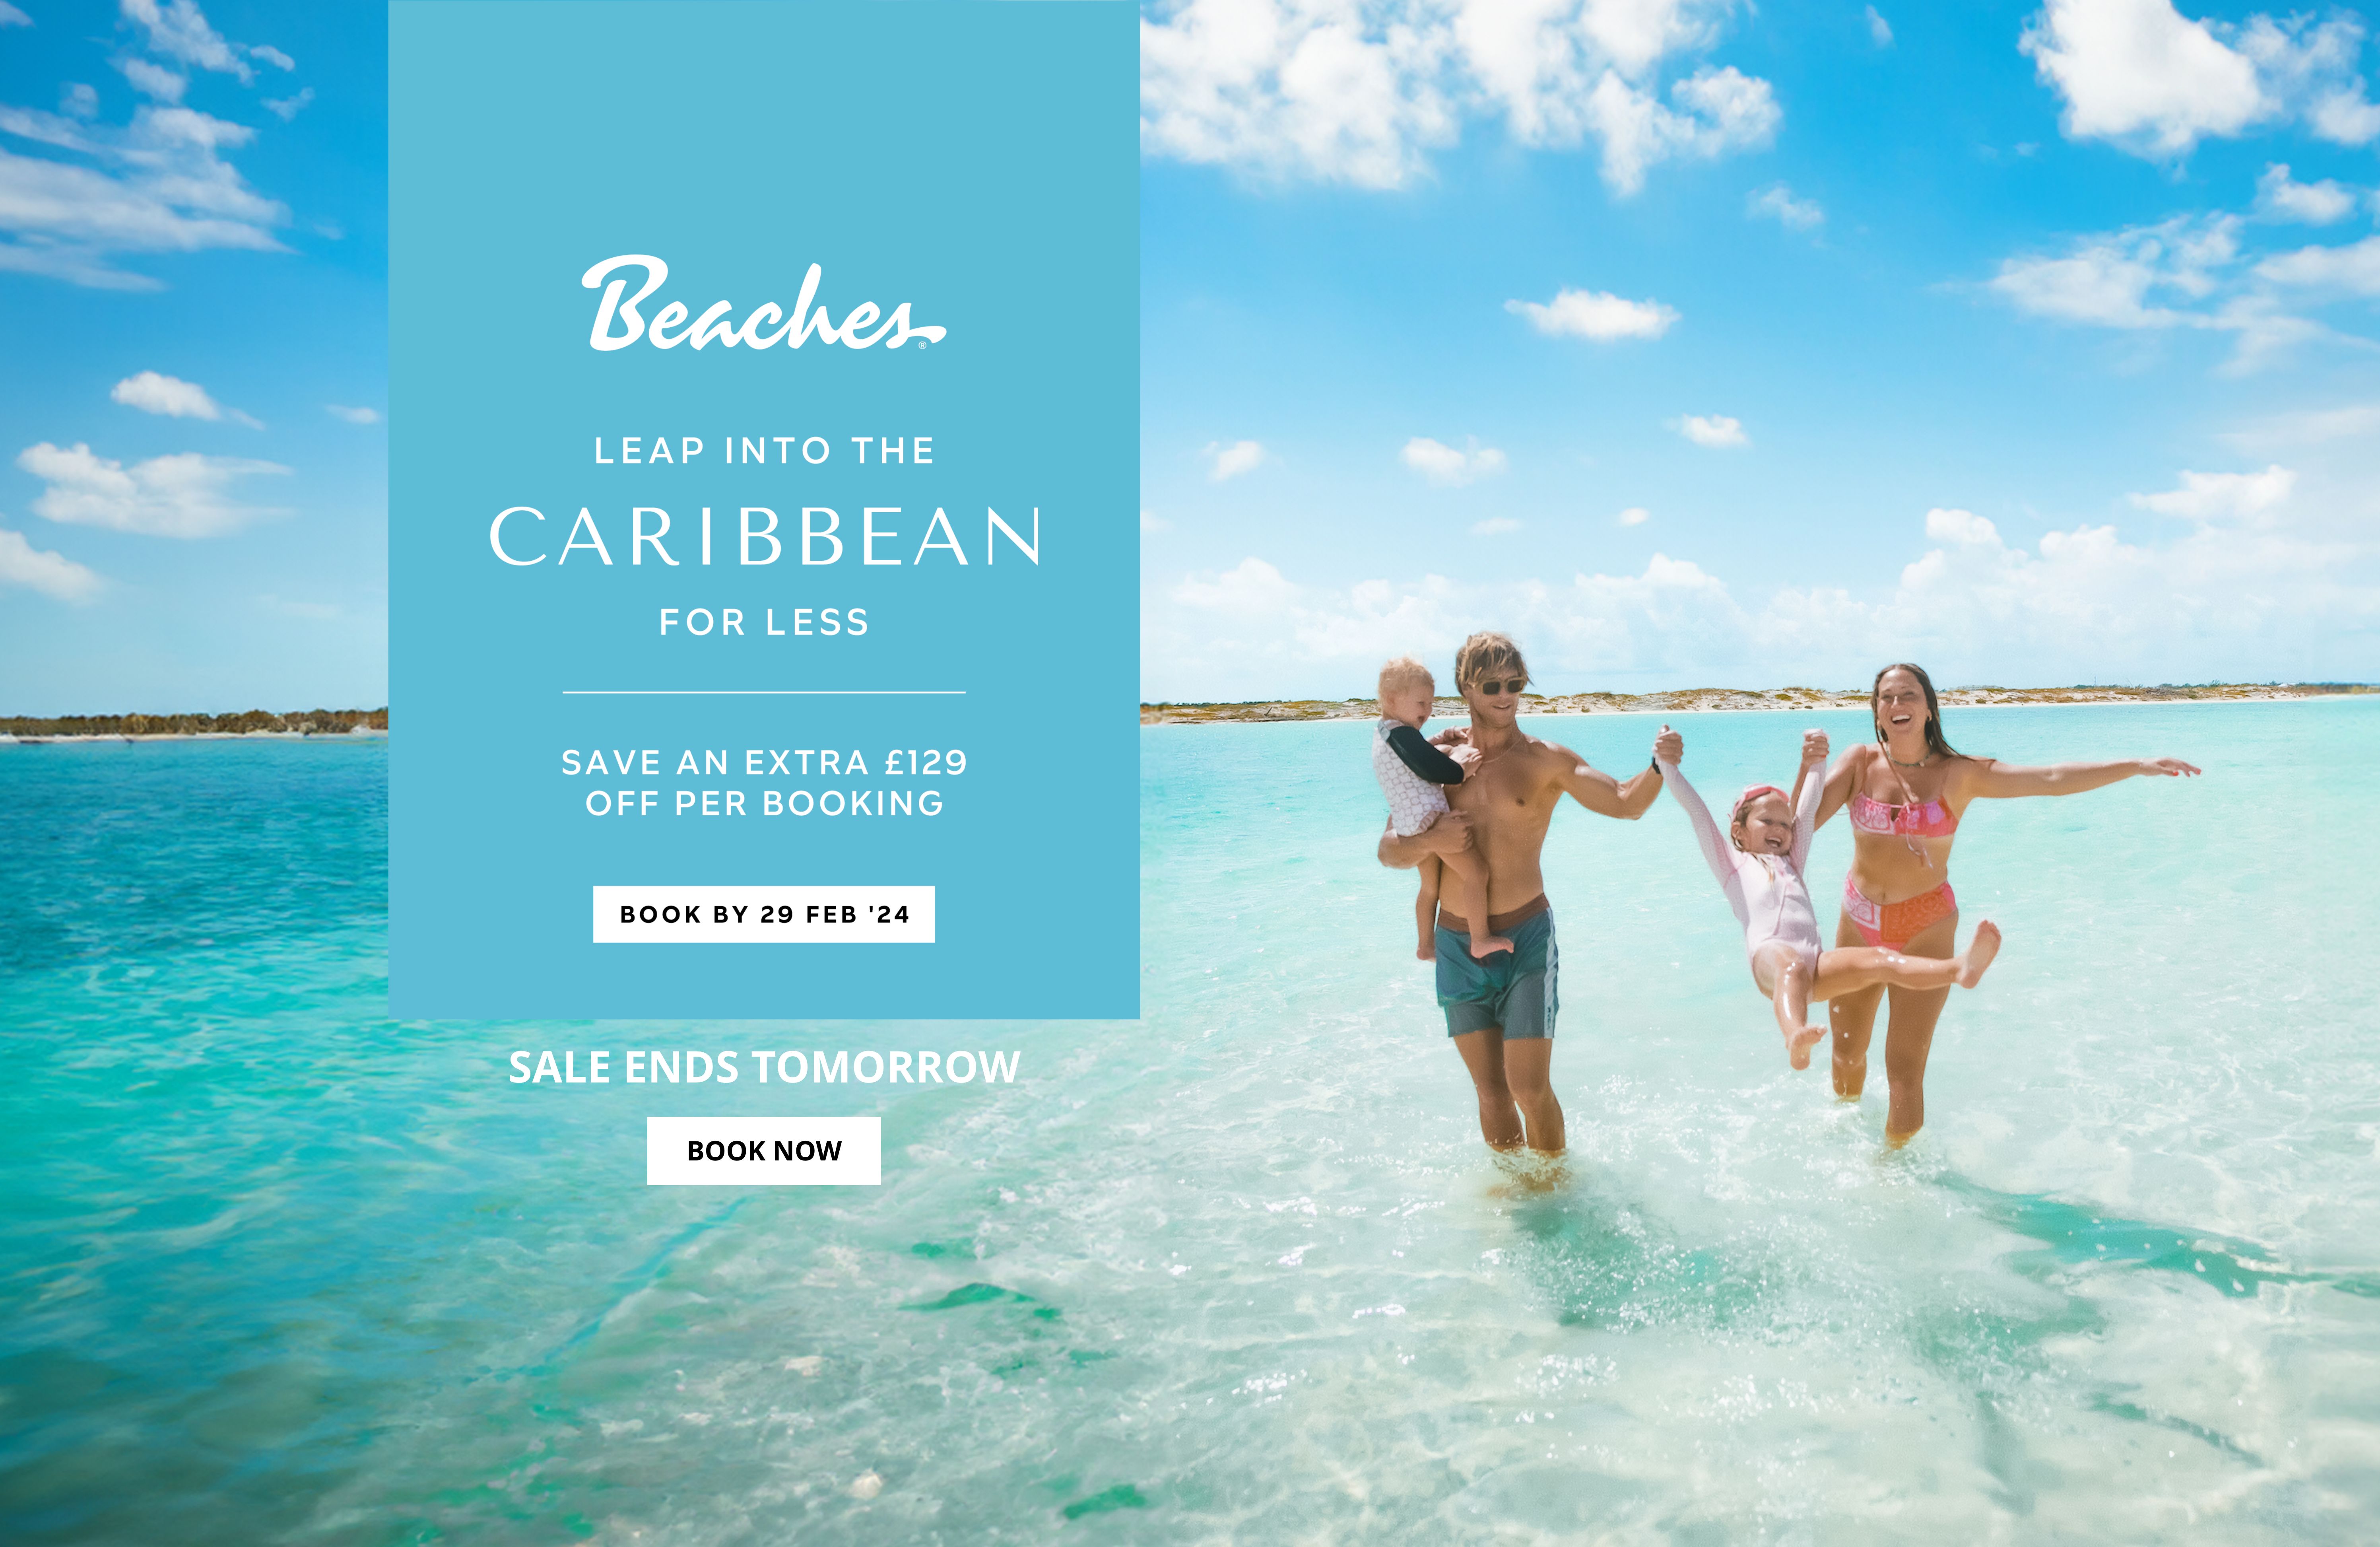 LEAP INTO THE CARIBBEAN FOR LESS